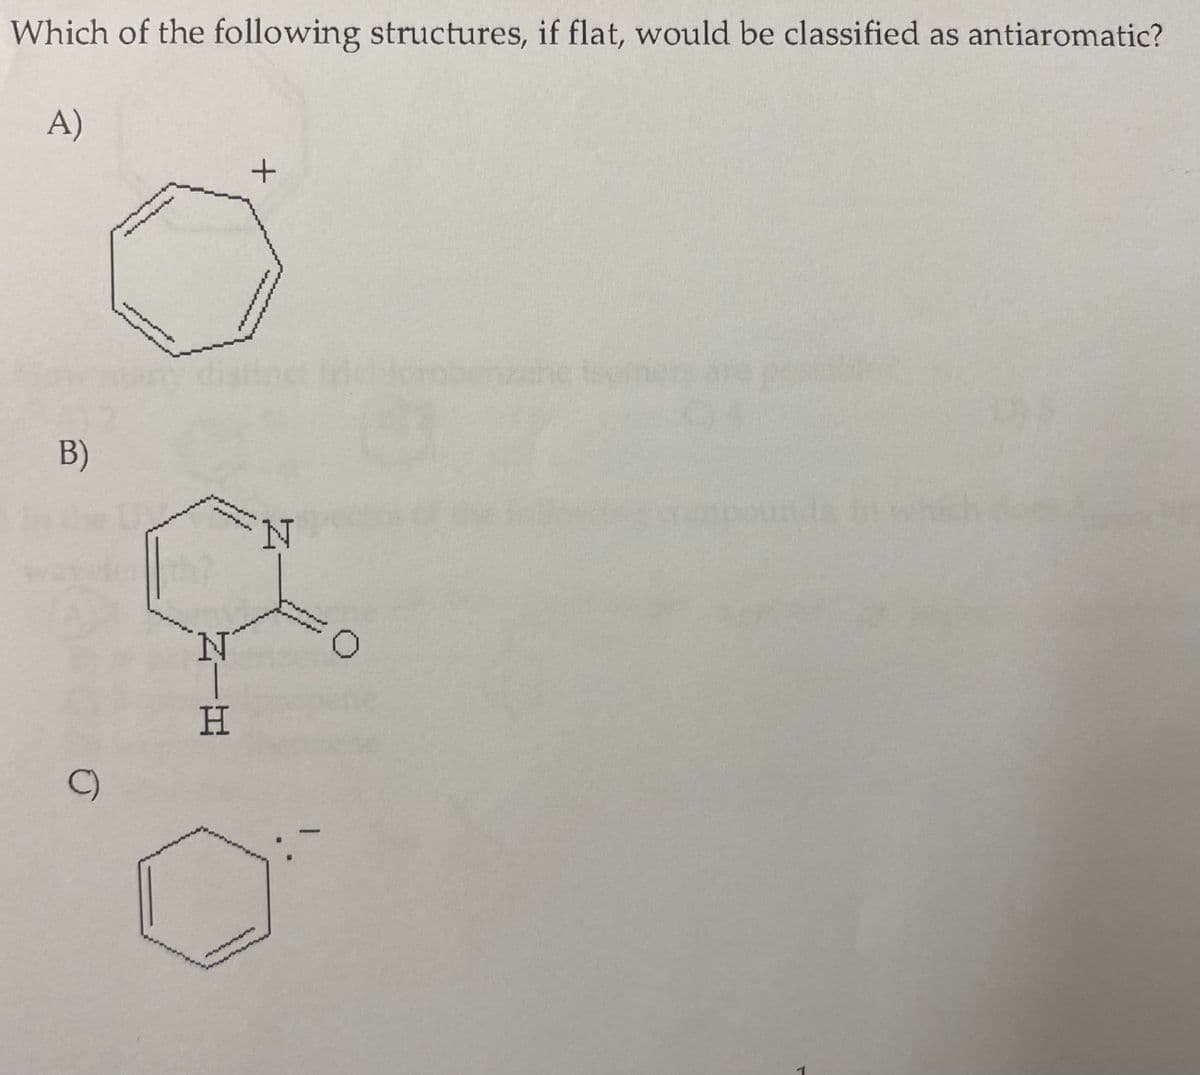 Which of the following structures, if flat, would be classified as antiaromatic?
A)
ehe teomers are p
B)
mpounds
N.
0.
H
